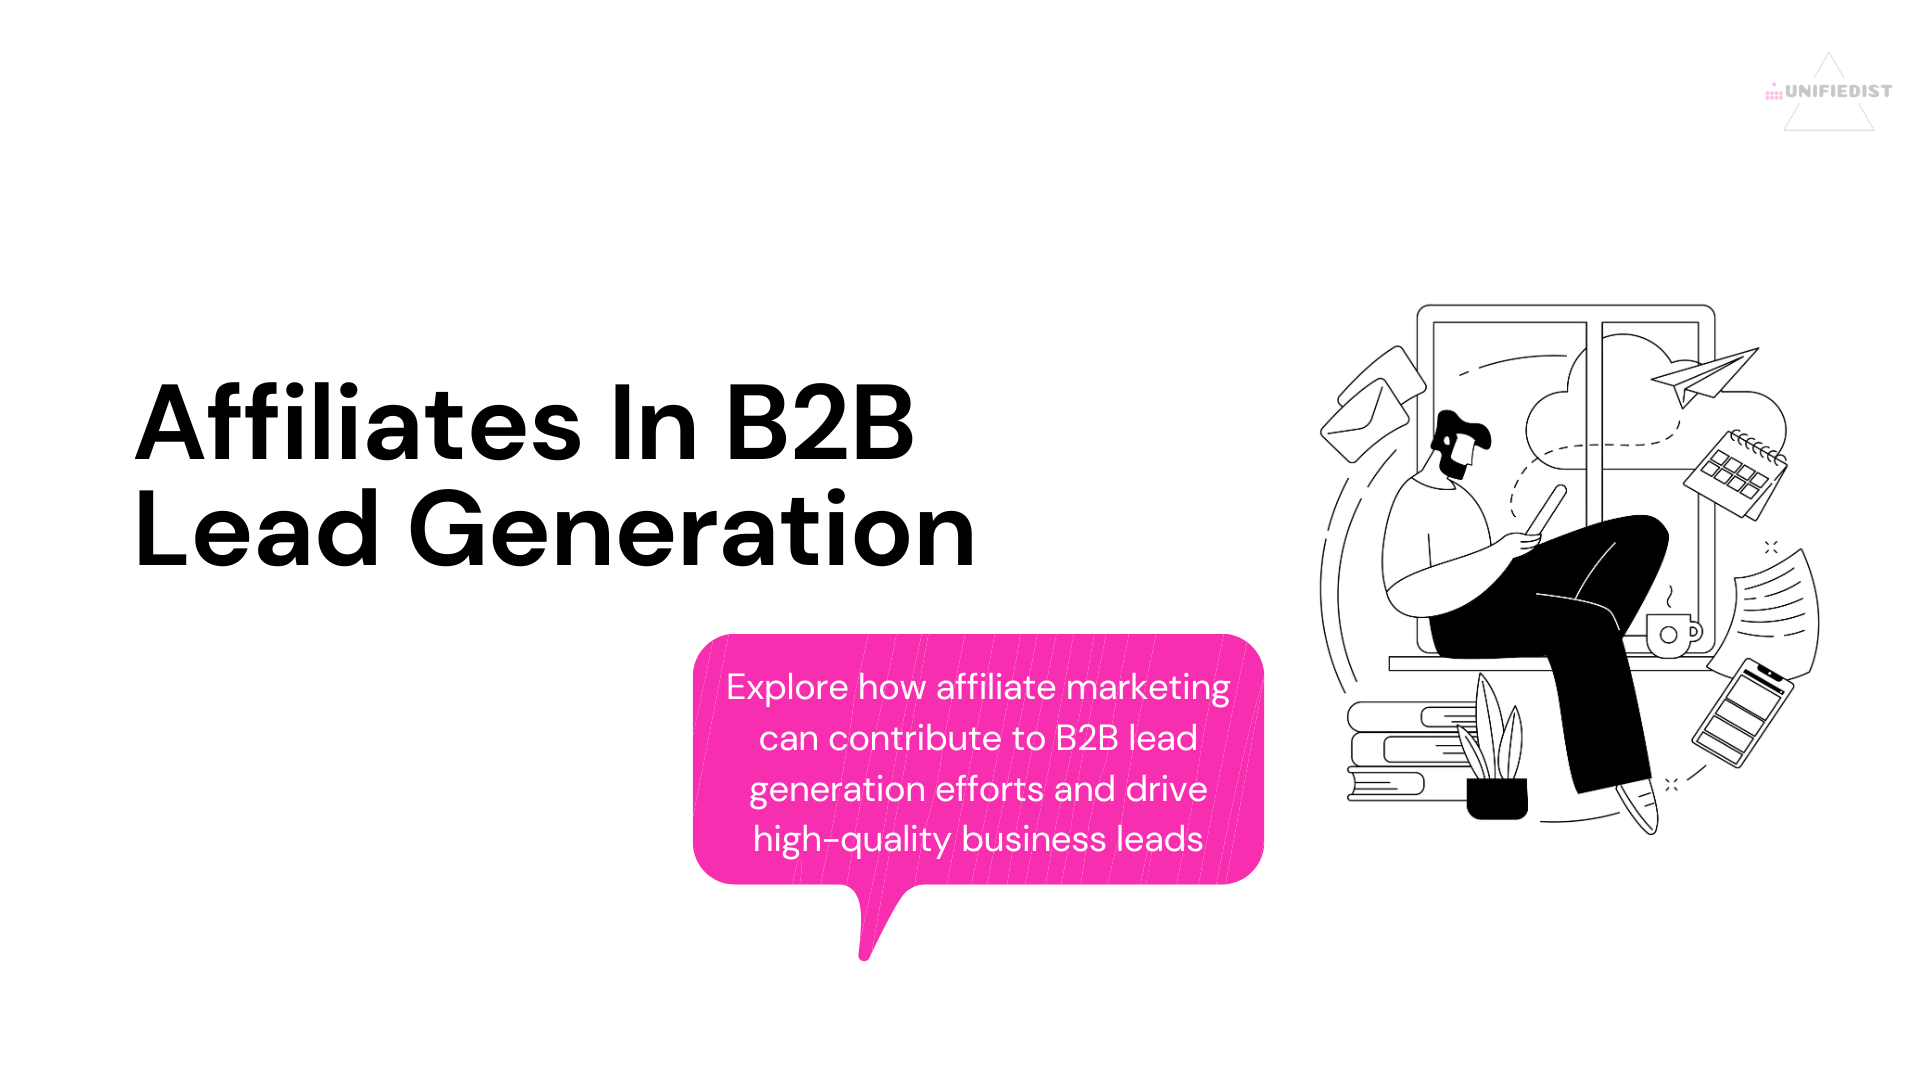 Affiliates in B2B Lead Generation: How to Use Affiliate Marketing to Drive High-Quality Business Leads